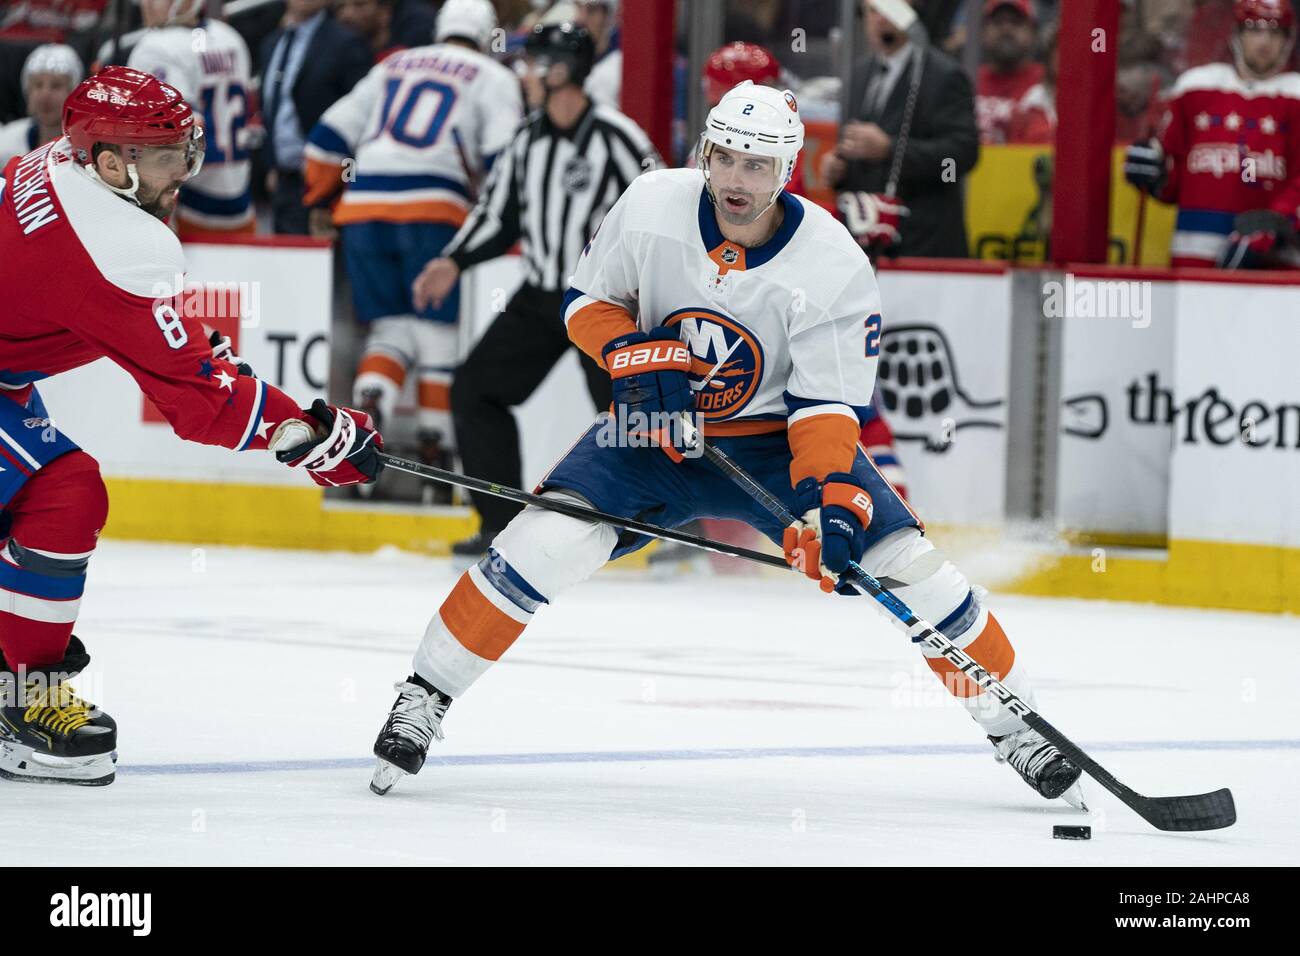 Washington, United States. 31st Dec, 2019. New York Islanders defenseman Nick Leddy (2) skates with the puck while defended by Washington Capitals left wing Alex Ovechkin (8) during the first period at Capital One Arena in Washington, DC on Tuesday, December 31, 2019. The Washington Capitals finish the decade as the winningest team in the NHL with 465 wins since 2010. Photo by Alex Edelman/UPI Credit: UPI/Alamy Live News Stock Photo